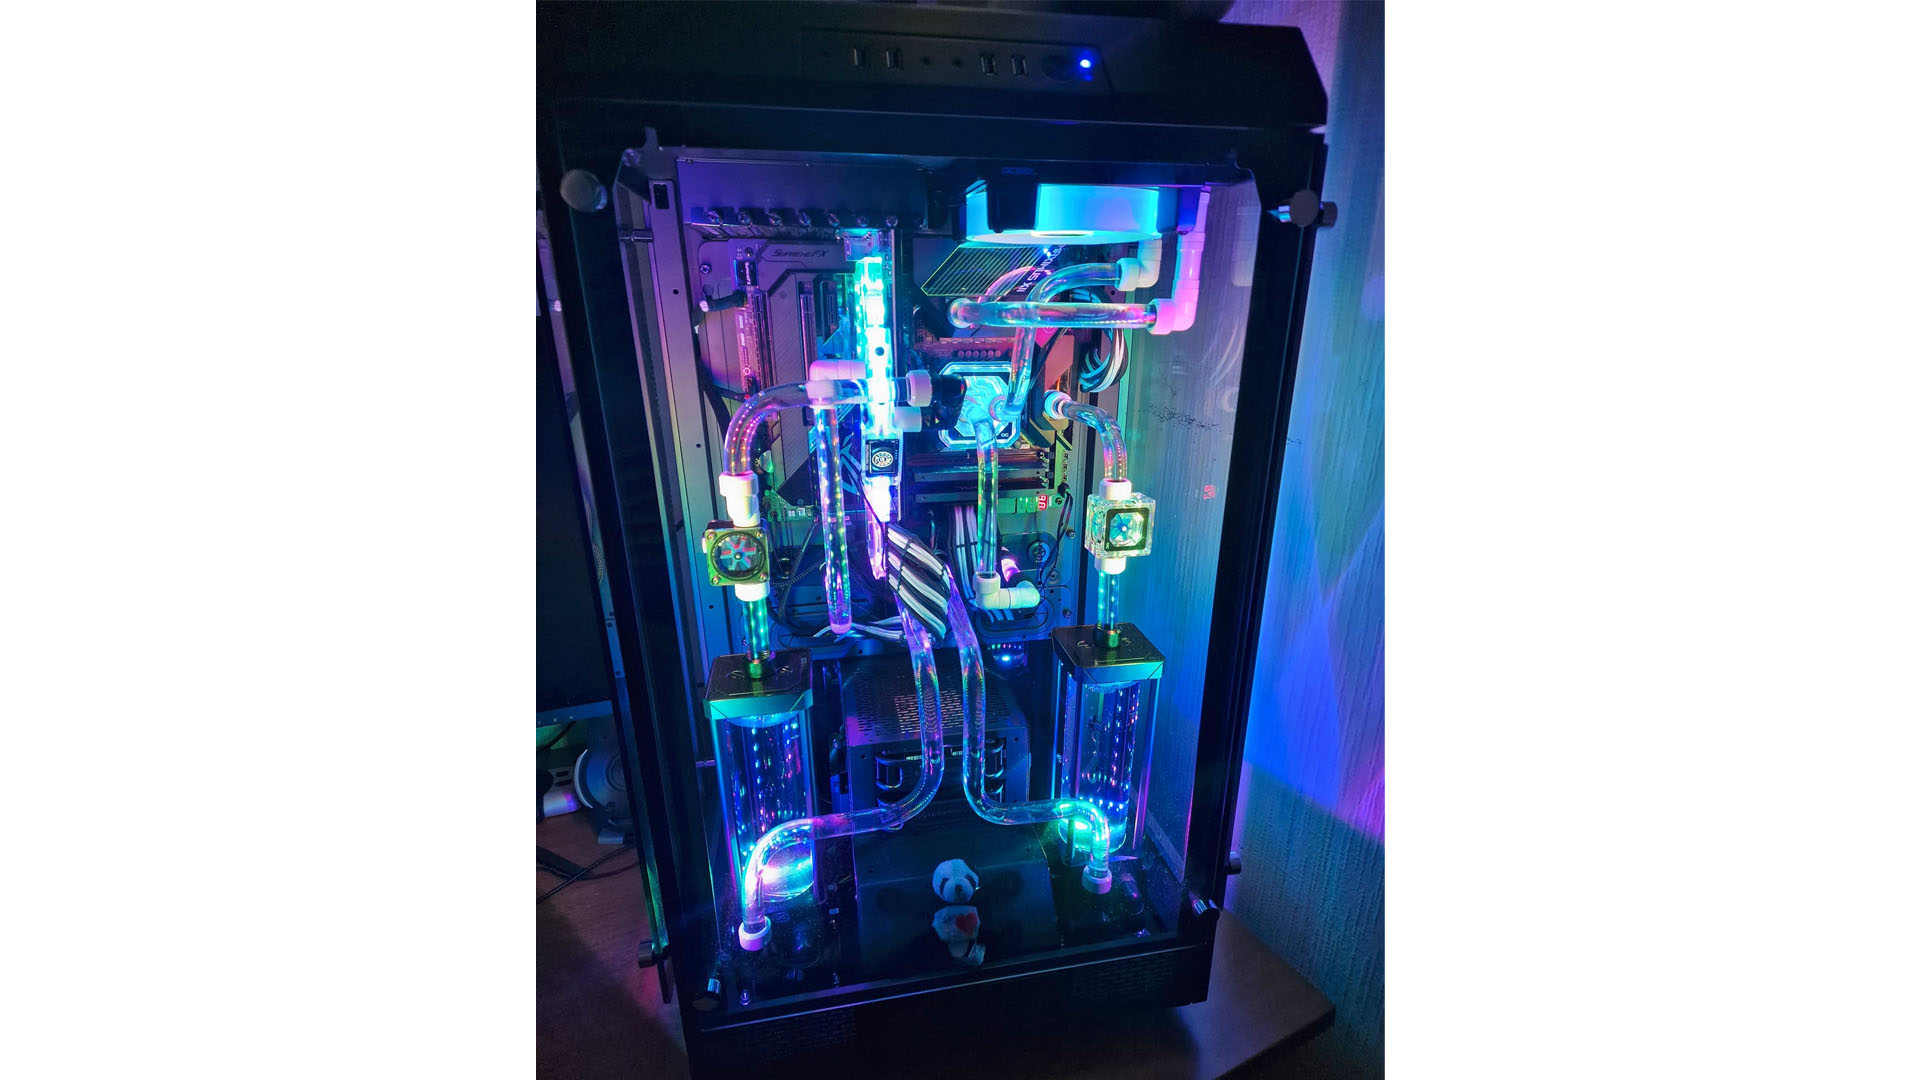 Dual reservoir Thermaltake Tower 900 water cooled PC 02